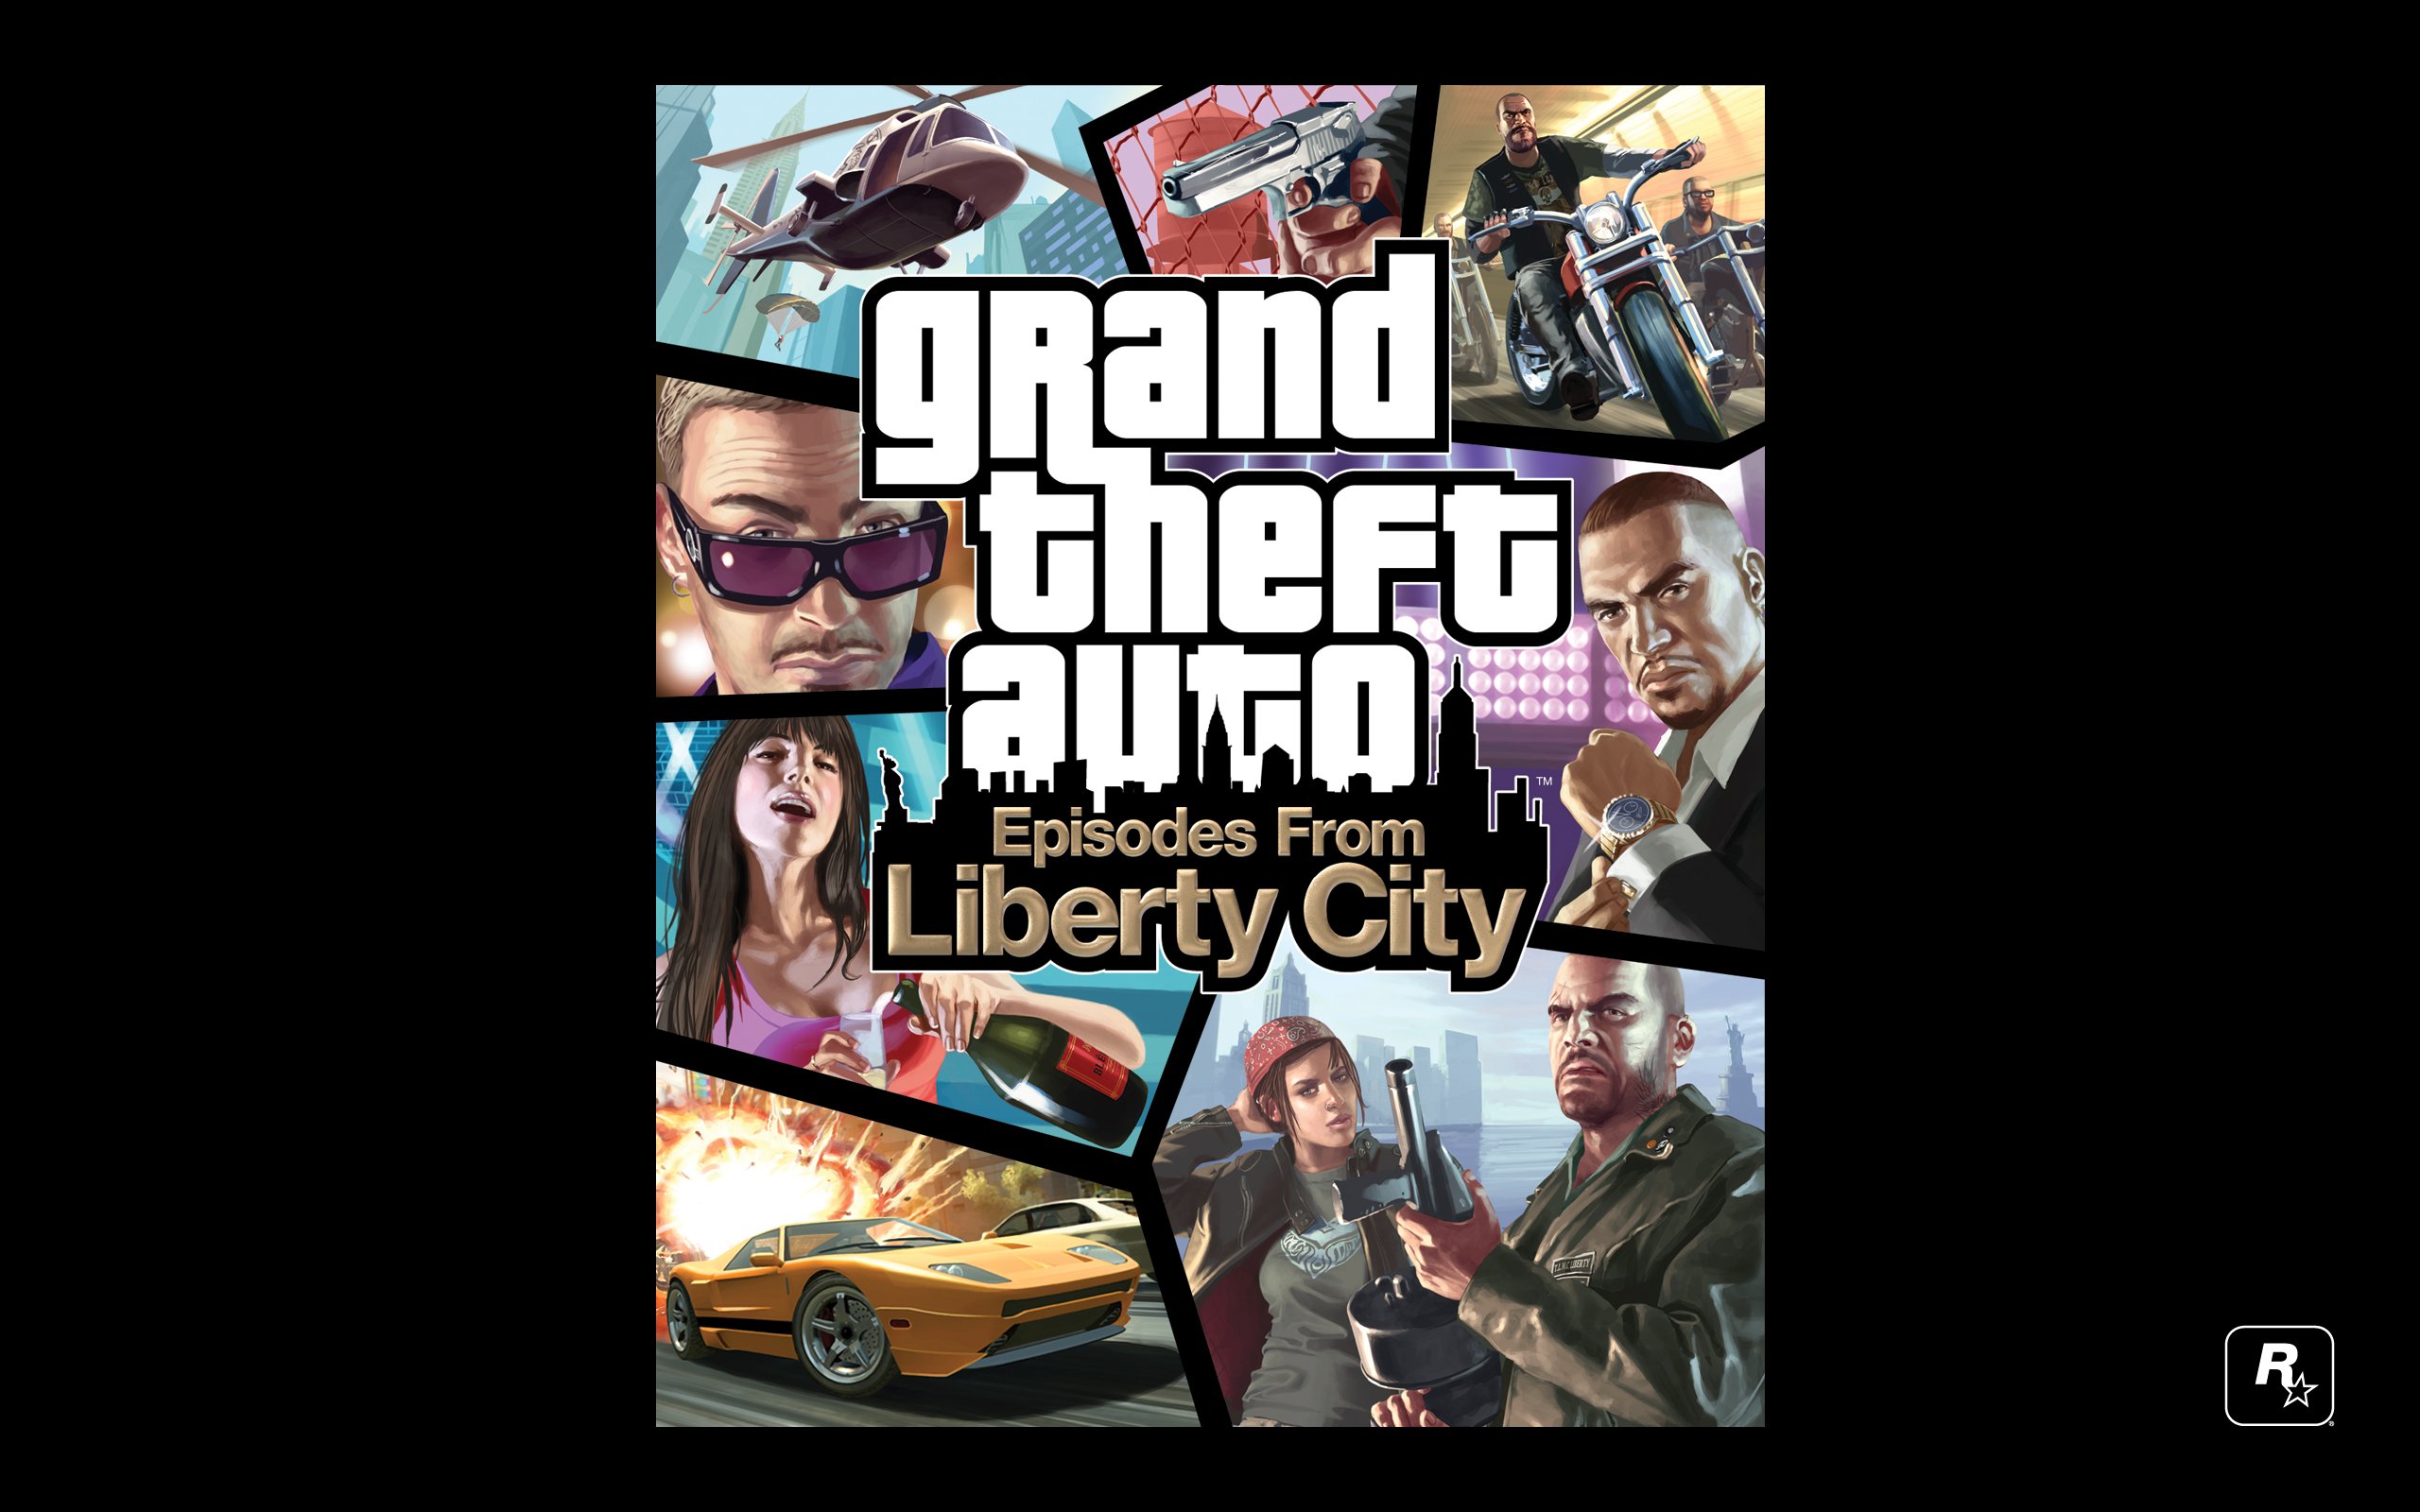 gta episodes from liberty city android